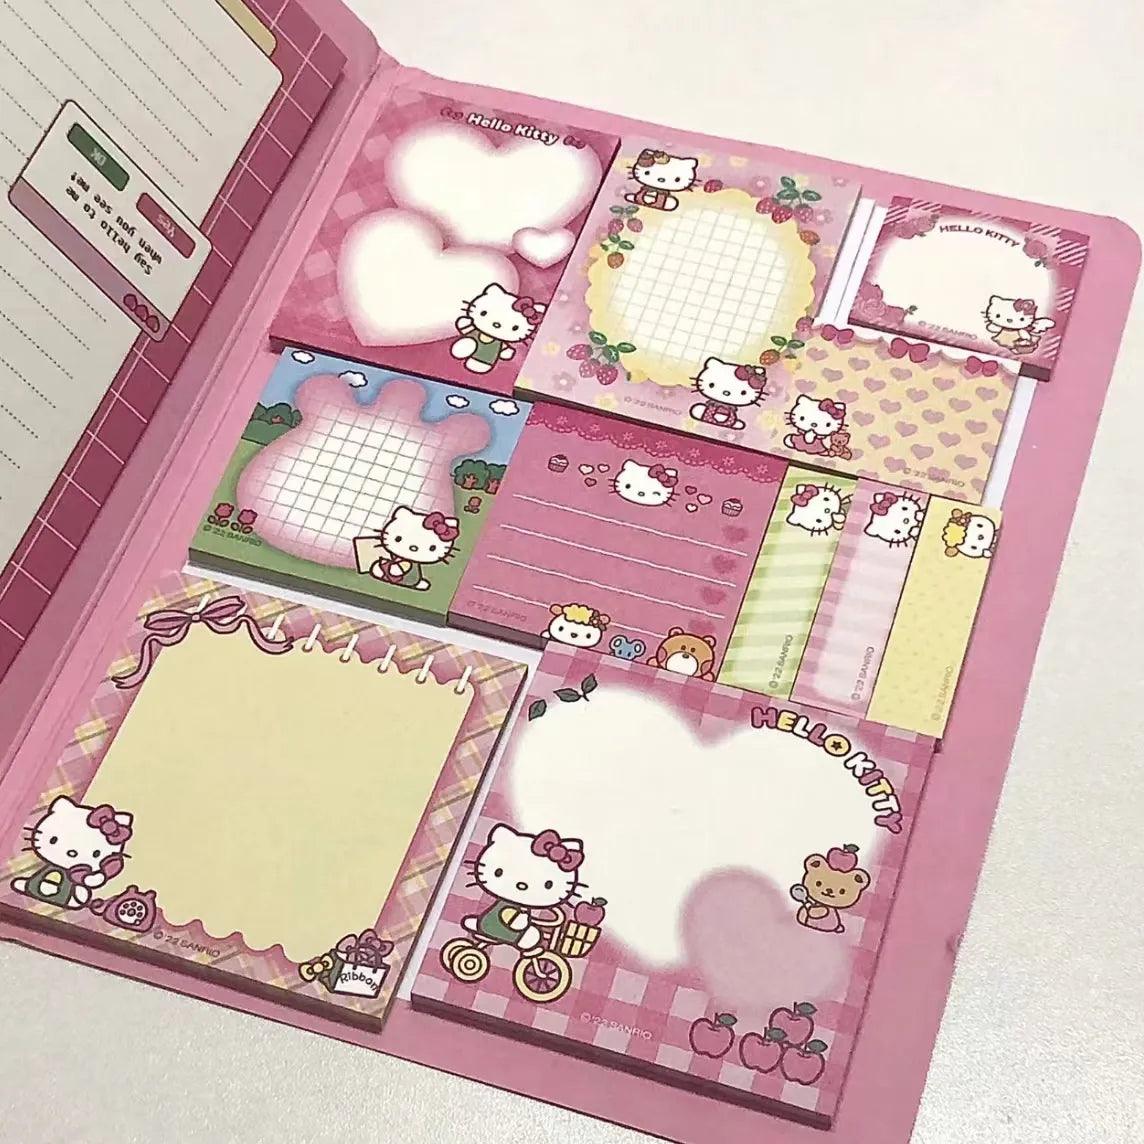 Kawaii Sanrio Hello Kitty Character Notebook Set for Students and Offices  ourlum.com 1Pc Kitty  